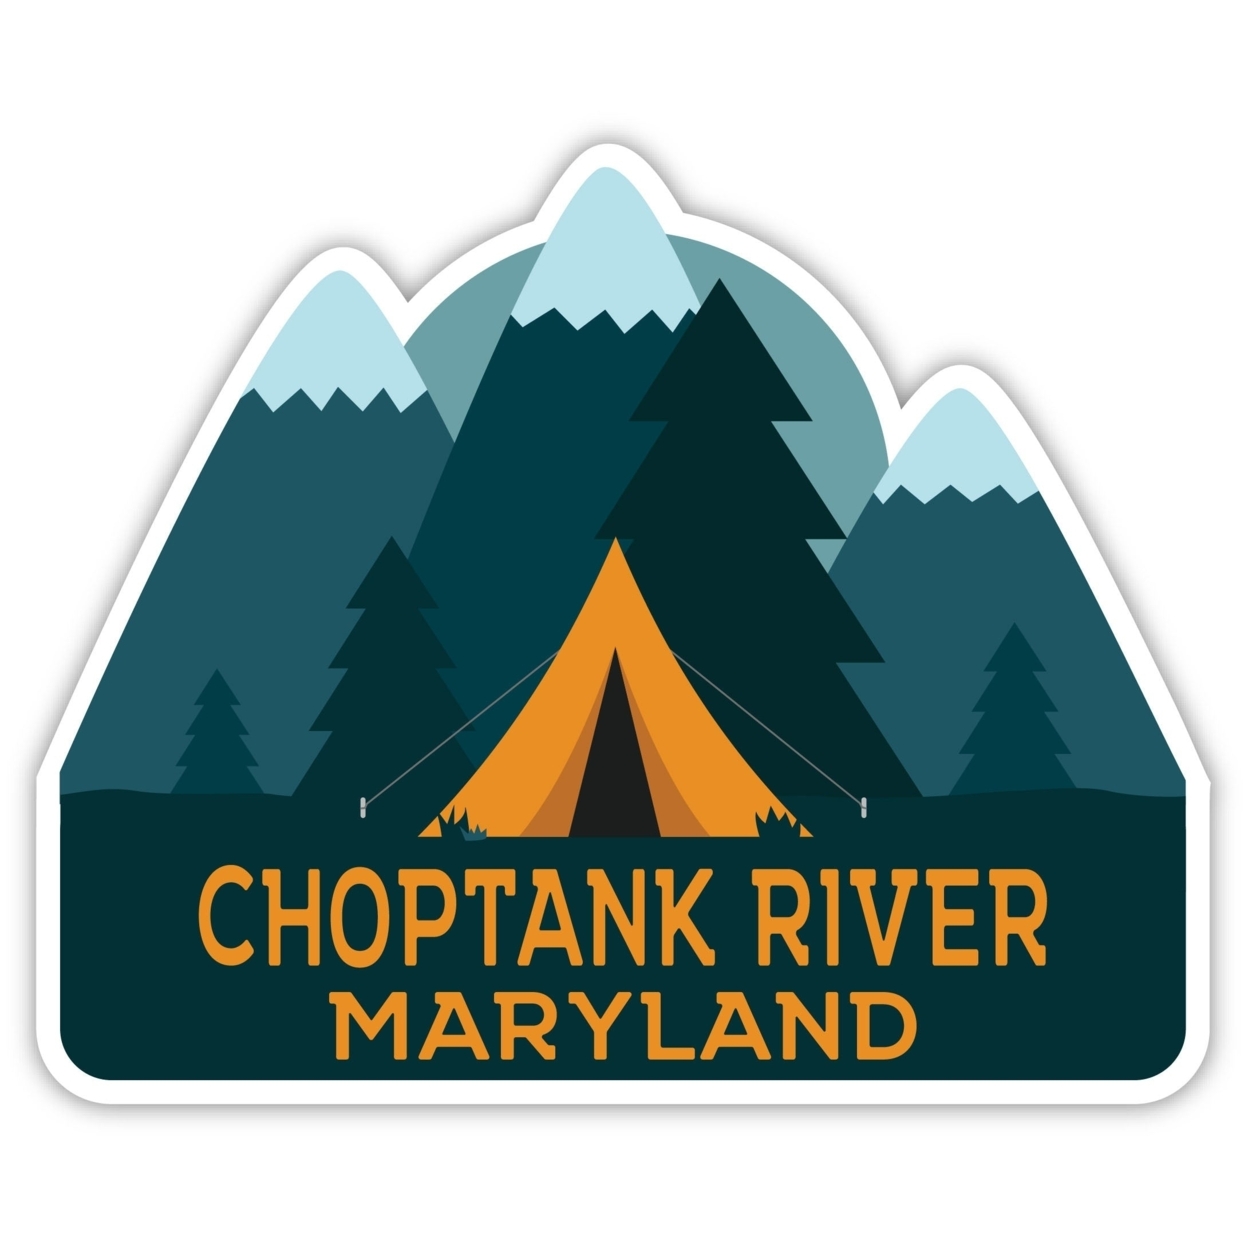 Choptank River Maryland Souvenir Decorative Stickers (Choose Theme And Size) - 4-Pack, 12-Inch, Tent